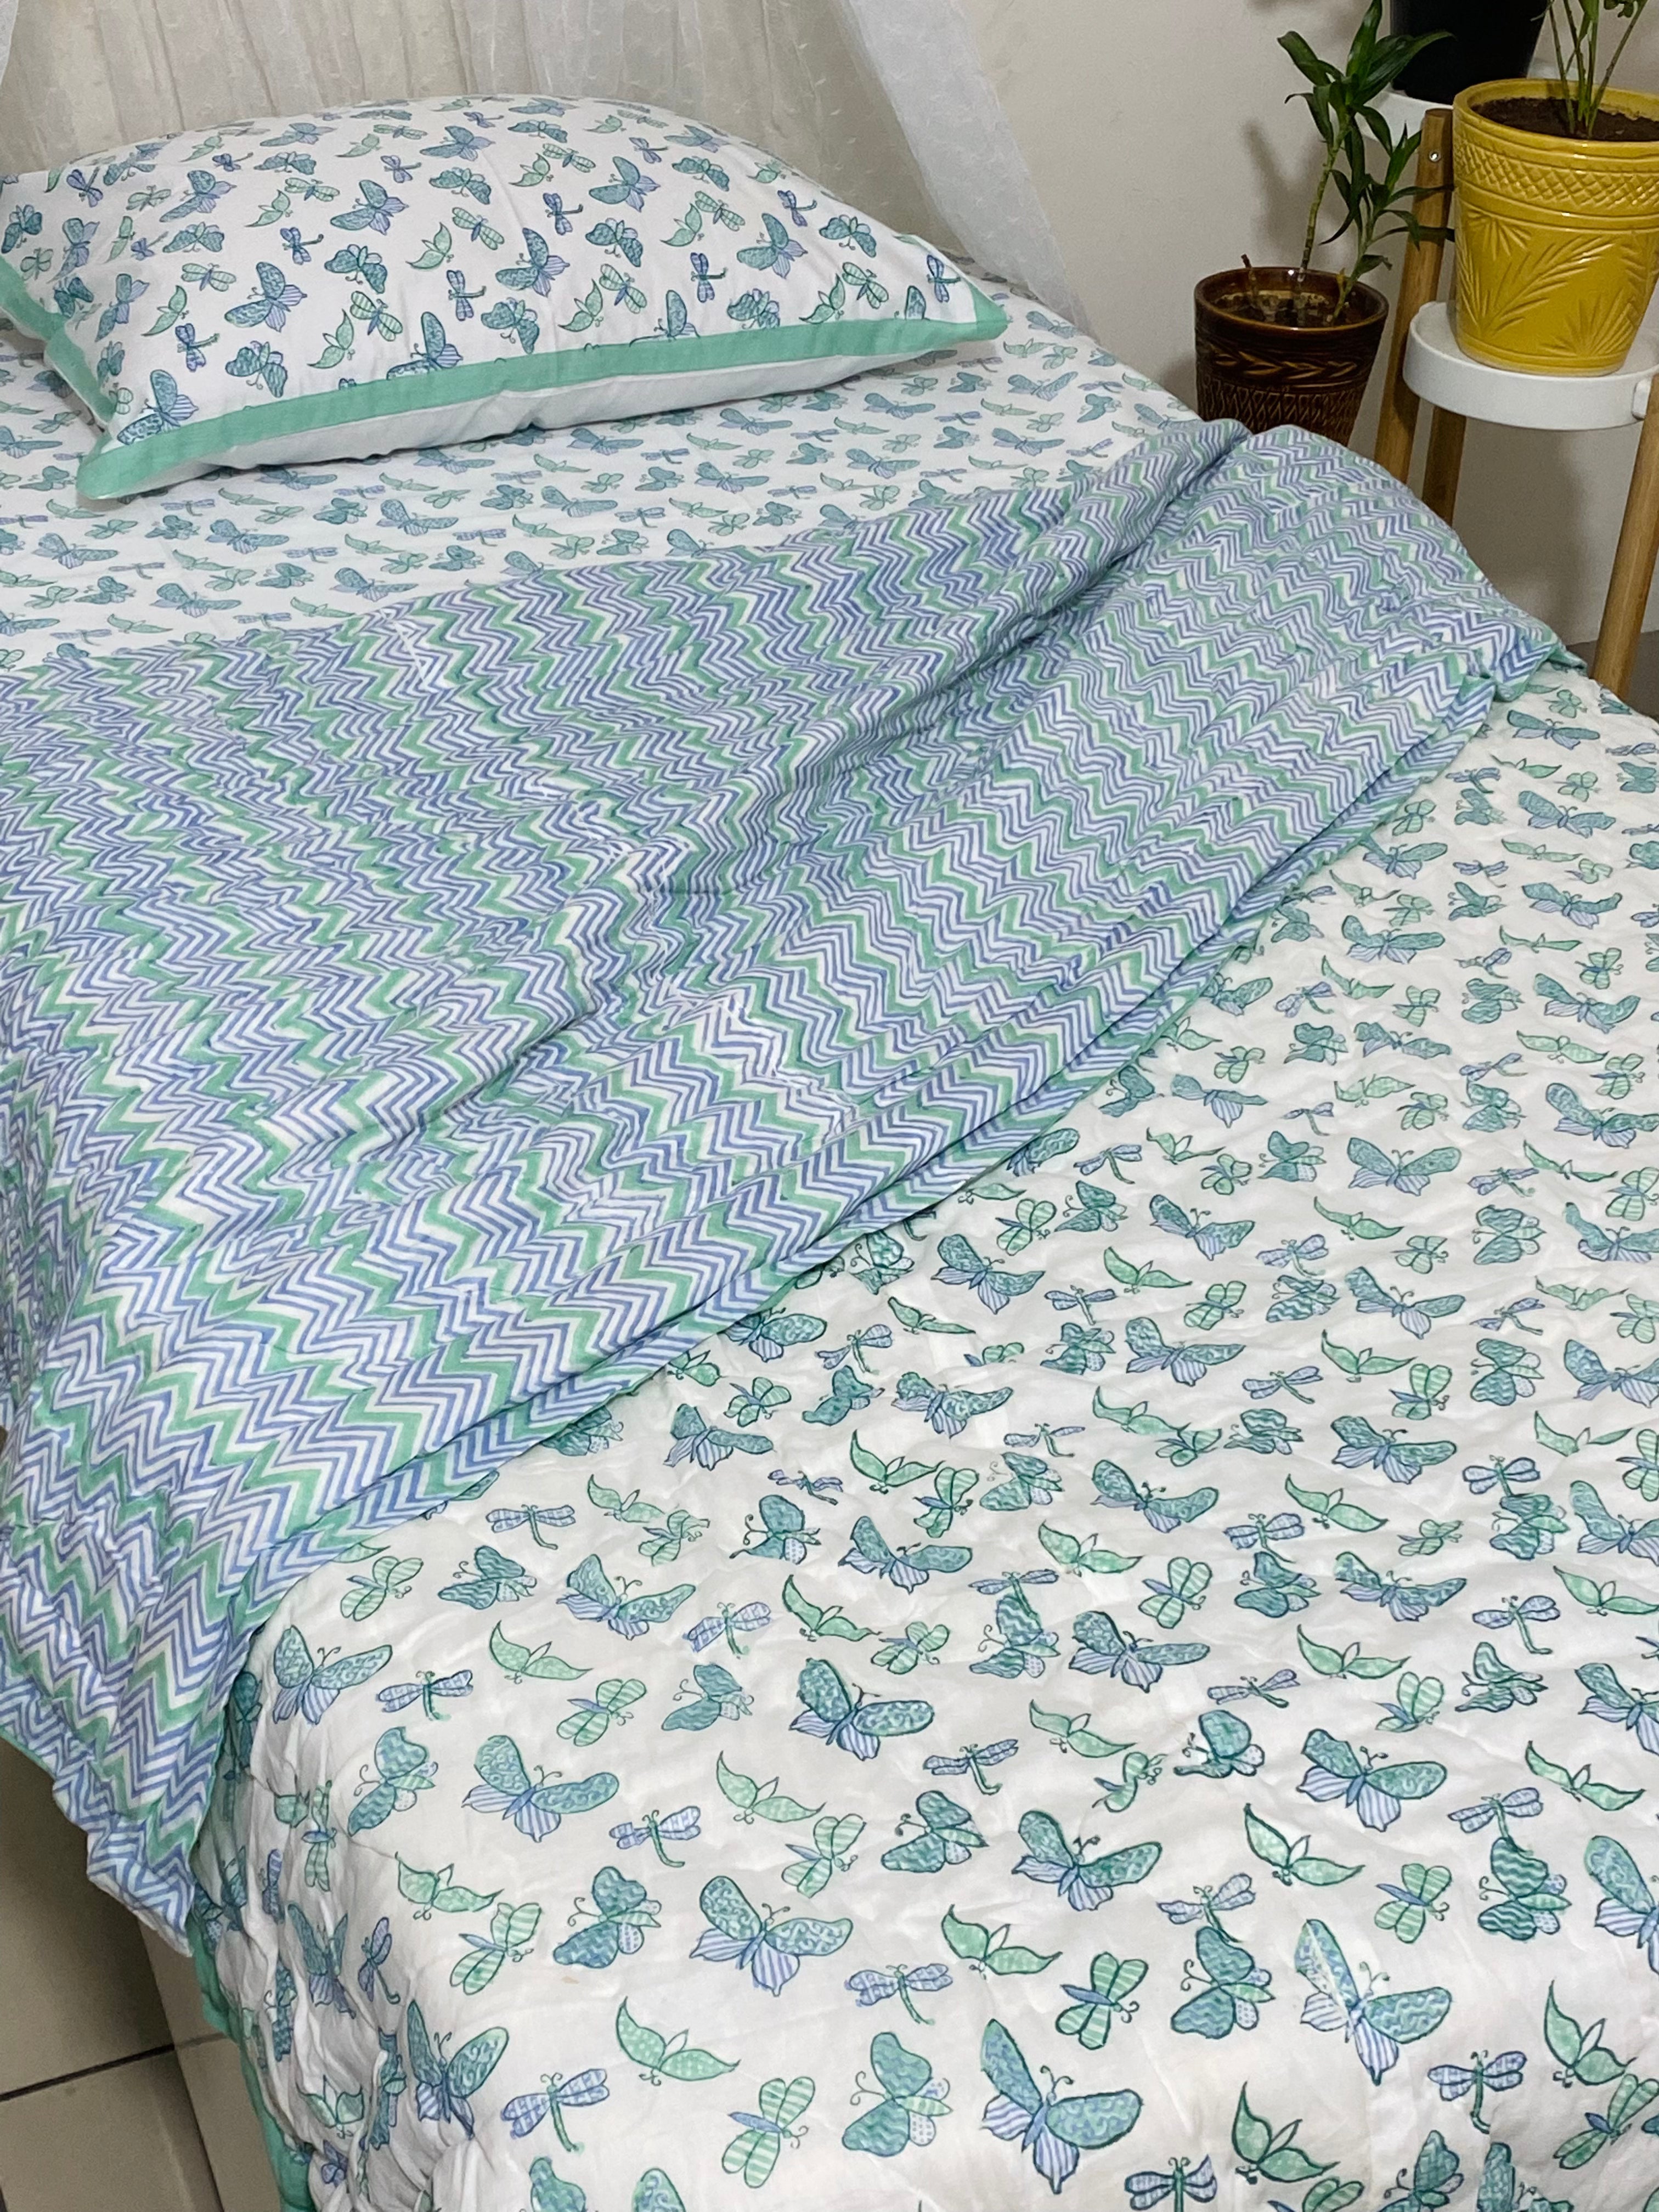 HandBlock Printed Mulmul Reversible Quilt- Single Size (90*60 inches)